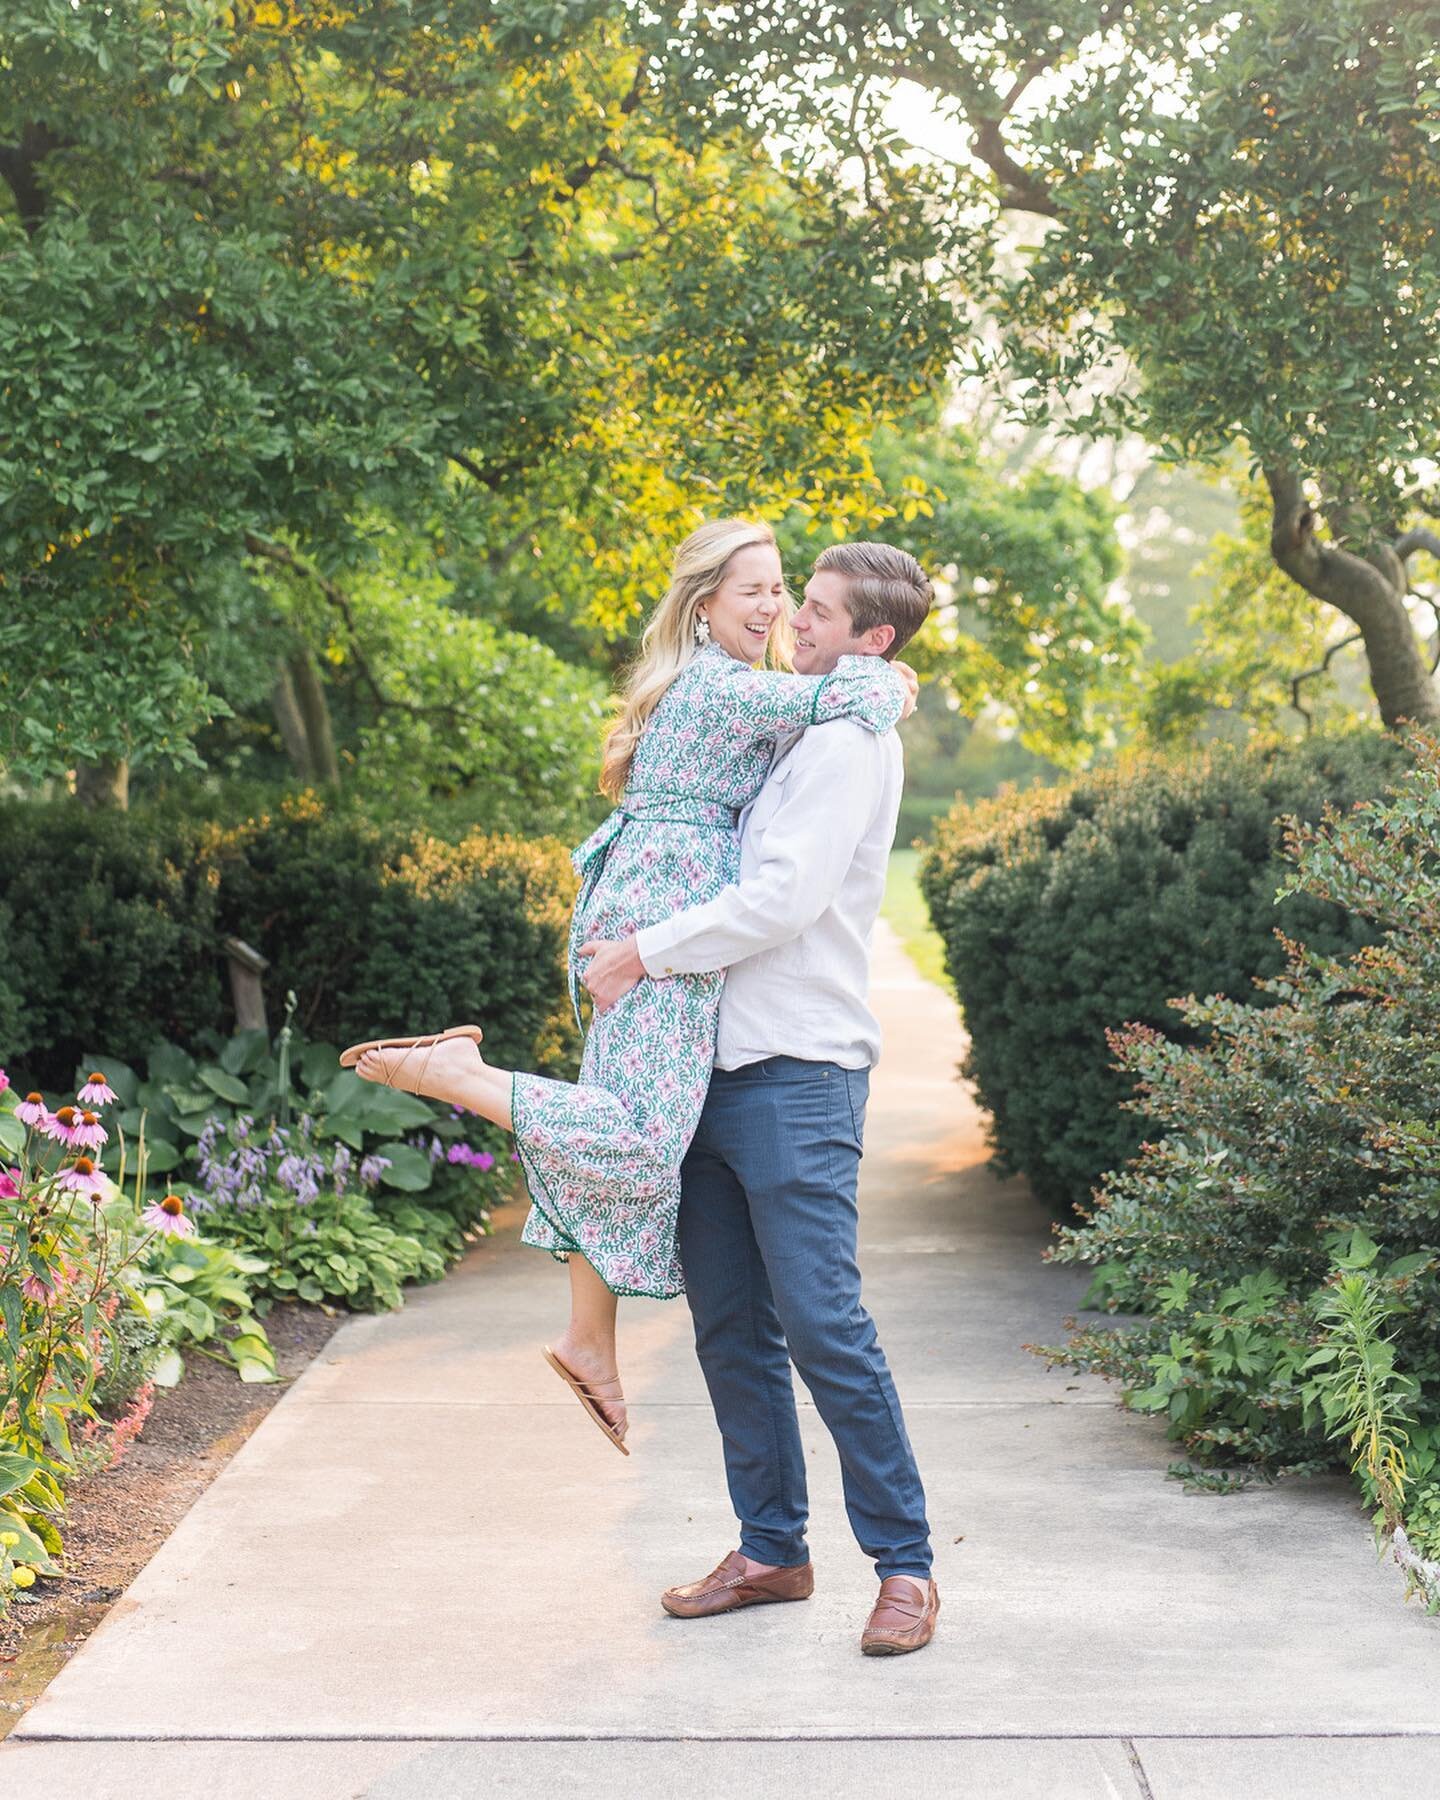 We had literally the most beautiful evening to stroll around the park for Megan &amp; John&rsquo;s engagement session! The weather has been on point lately and I&rsquo;m trying to take full advantage of that.